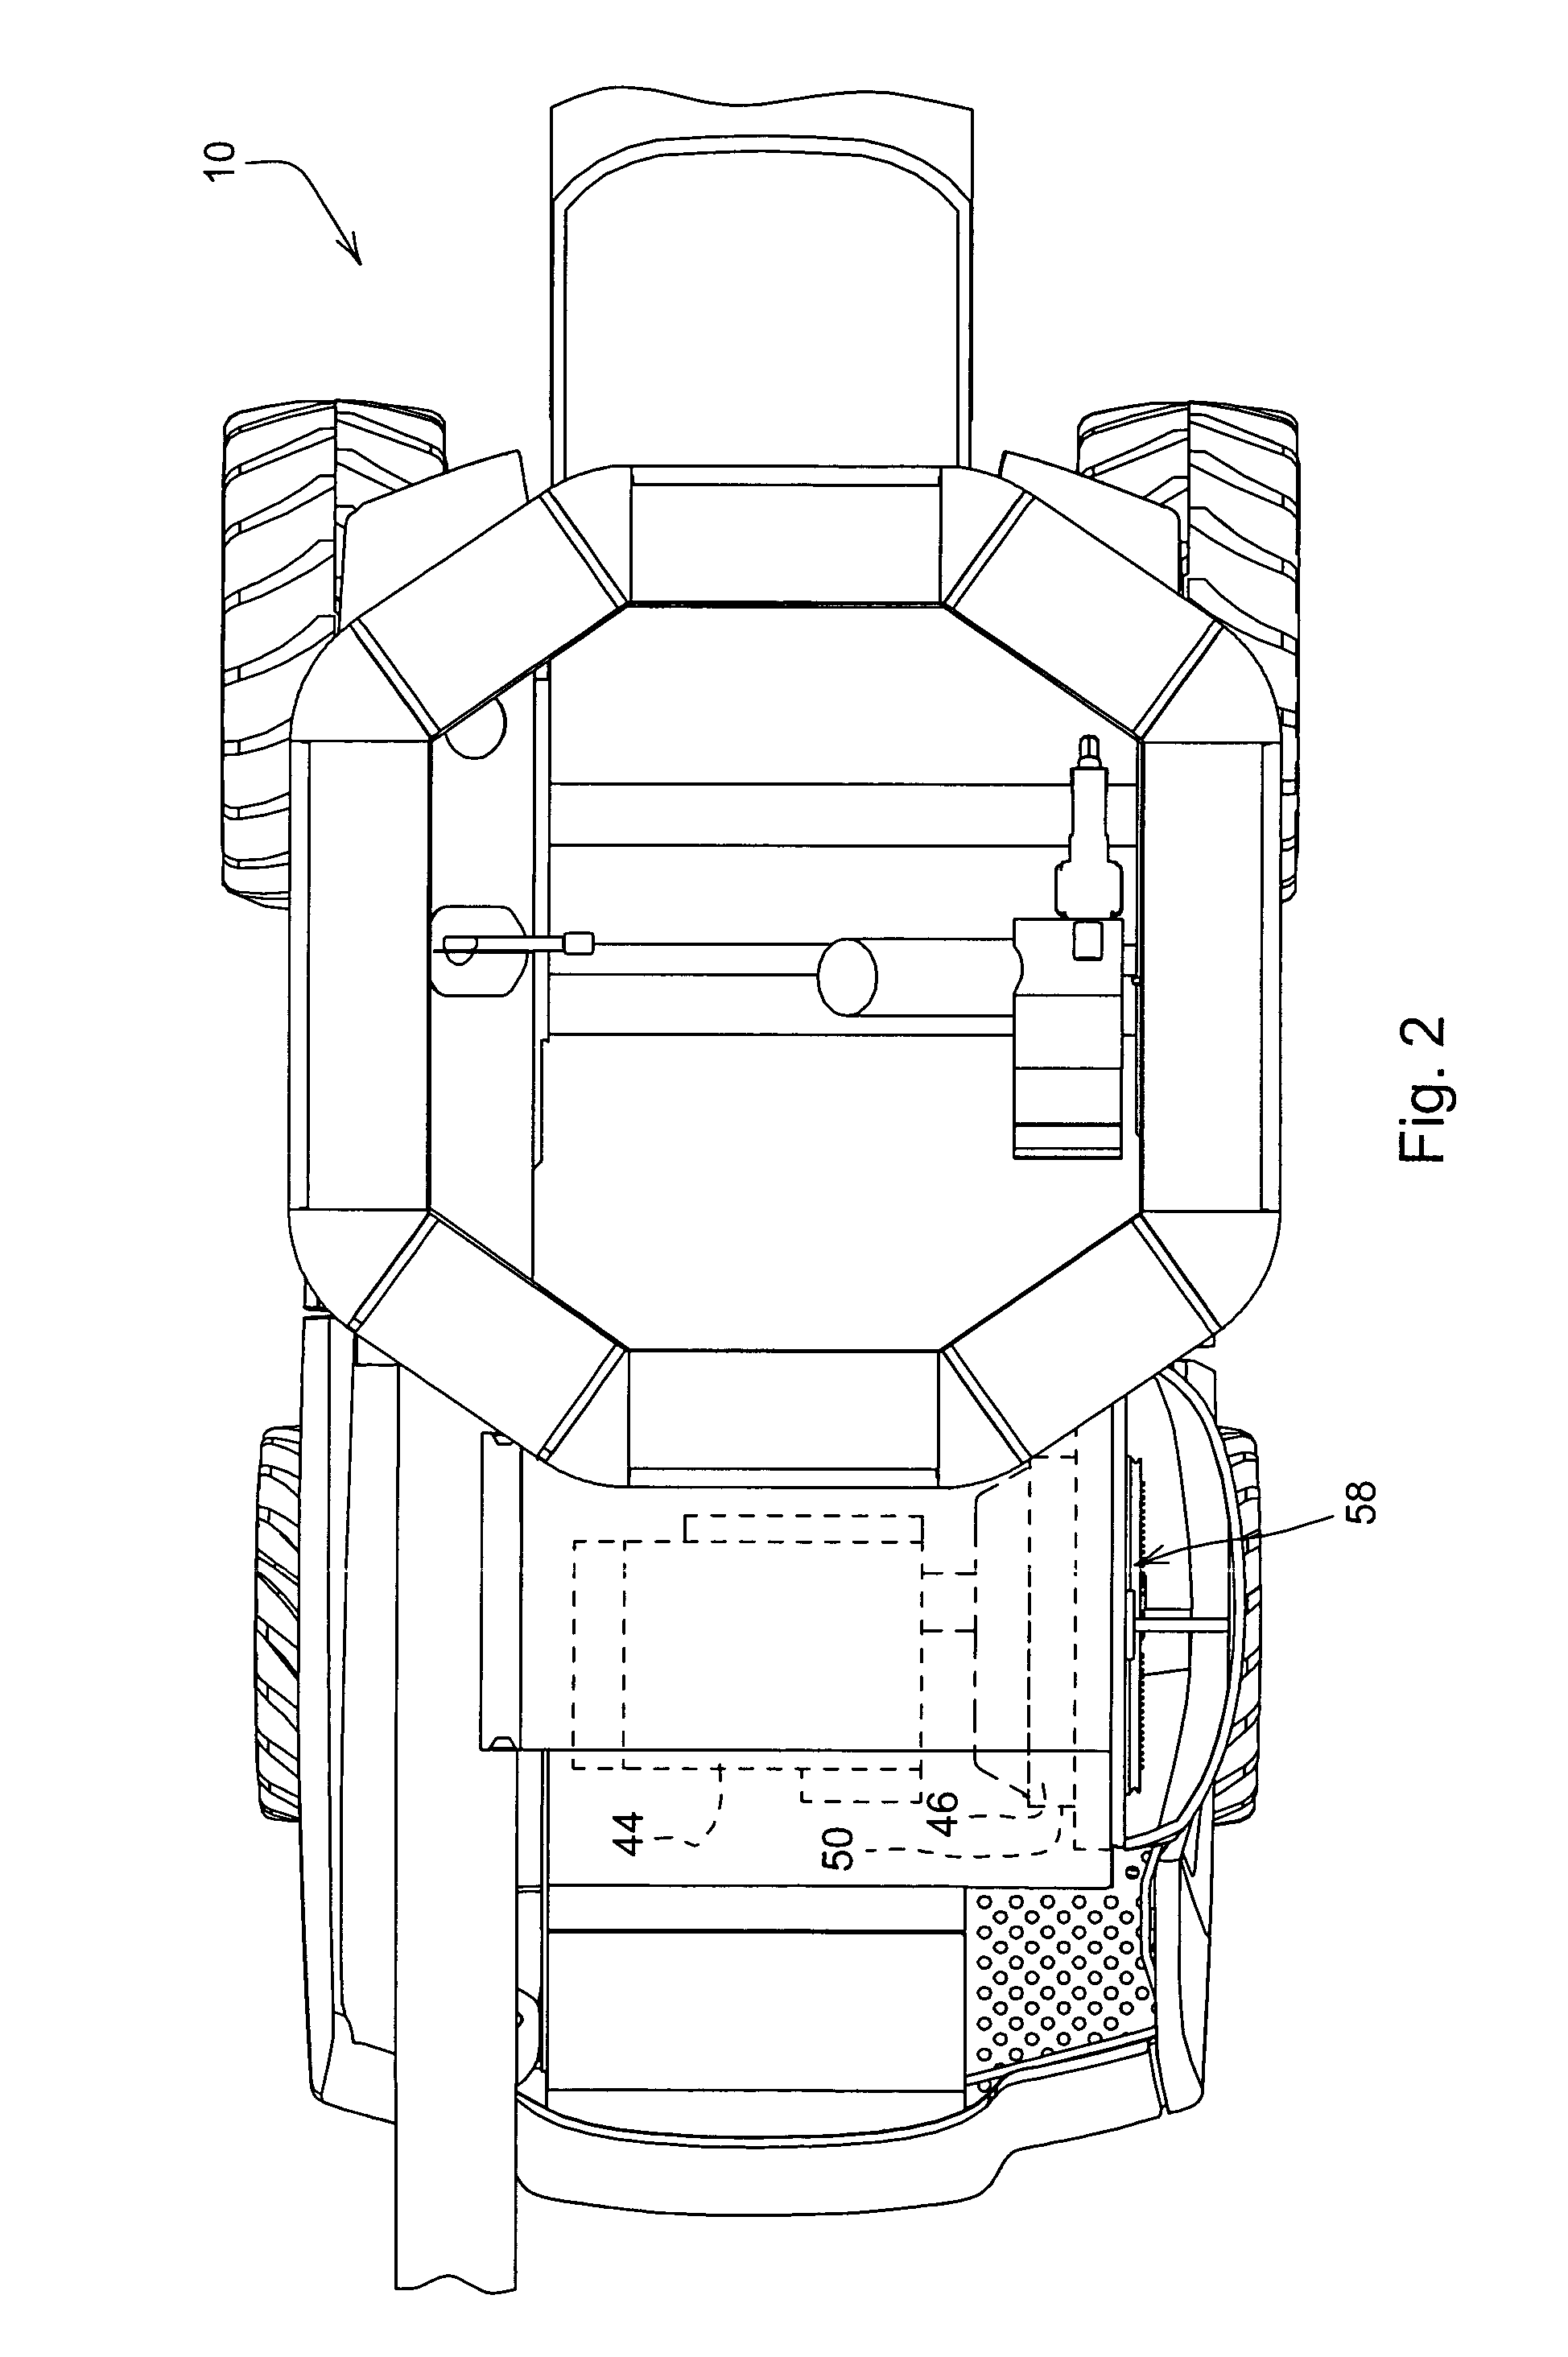 Air precleaner arrangement for an internal combustion engine comprising two cyclone filters